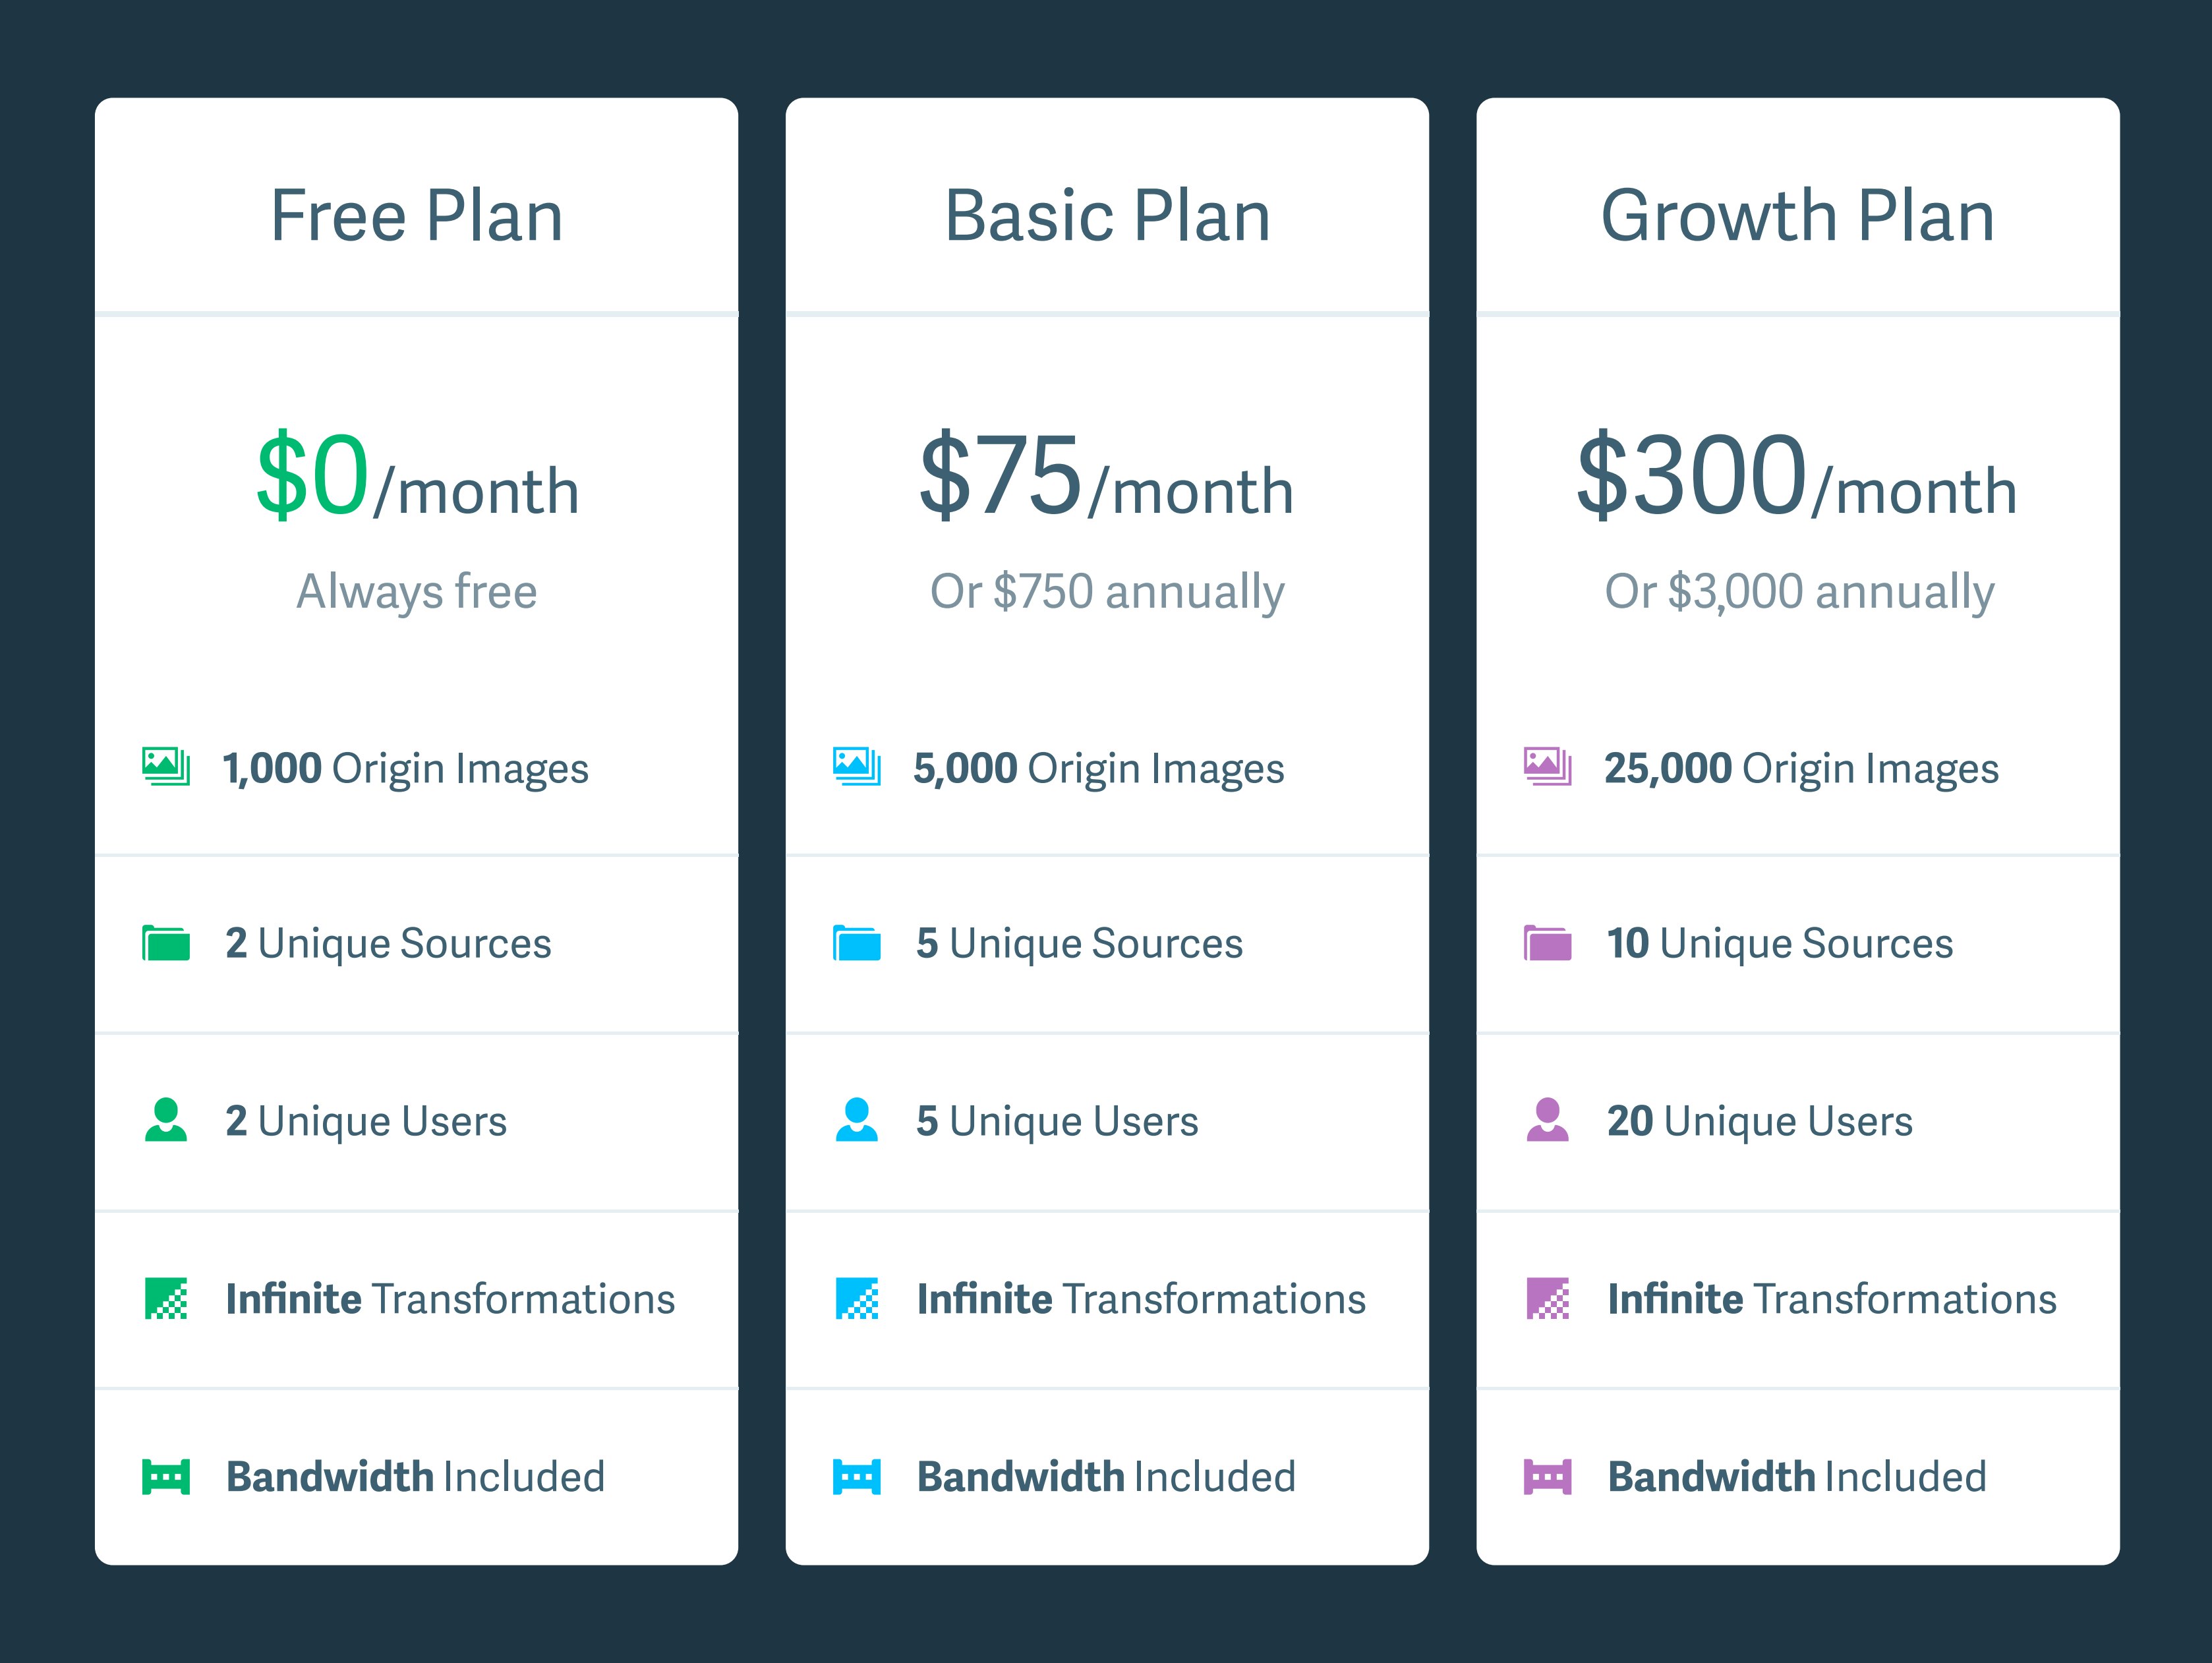 New pricing plan details